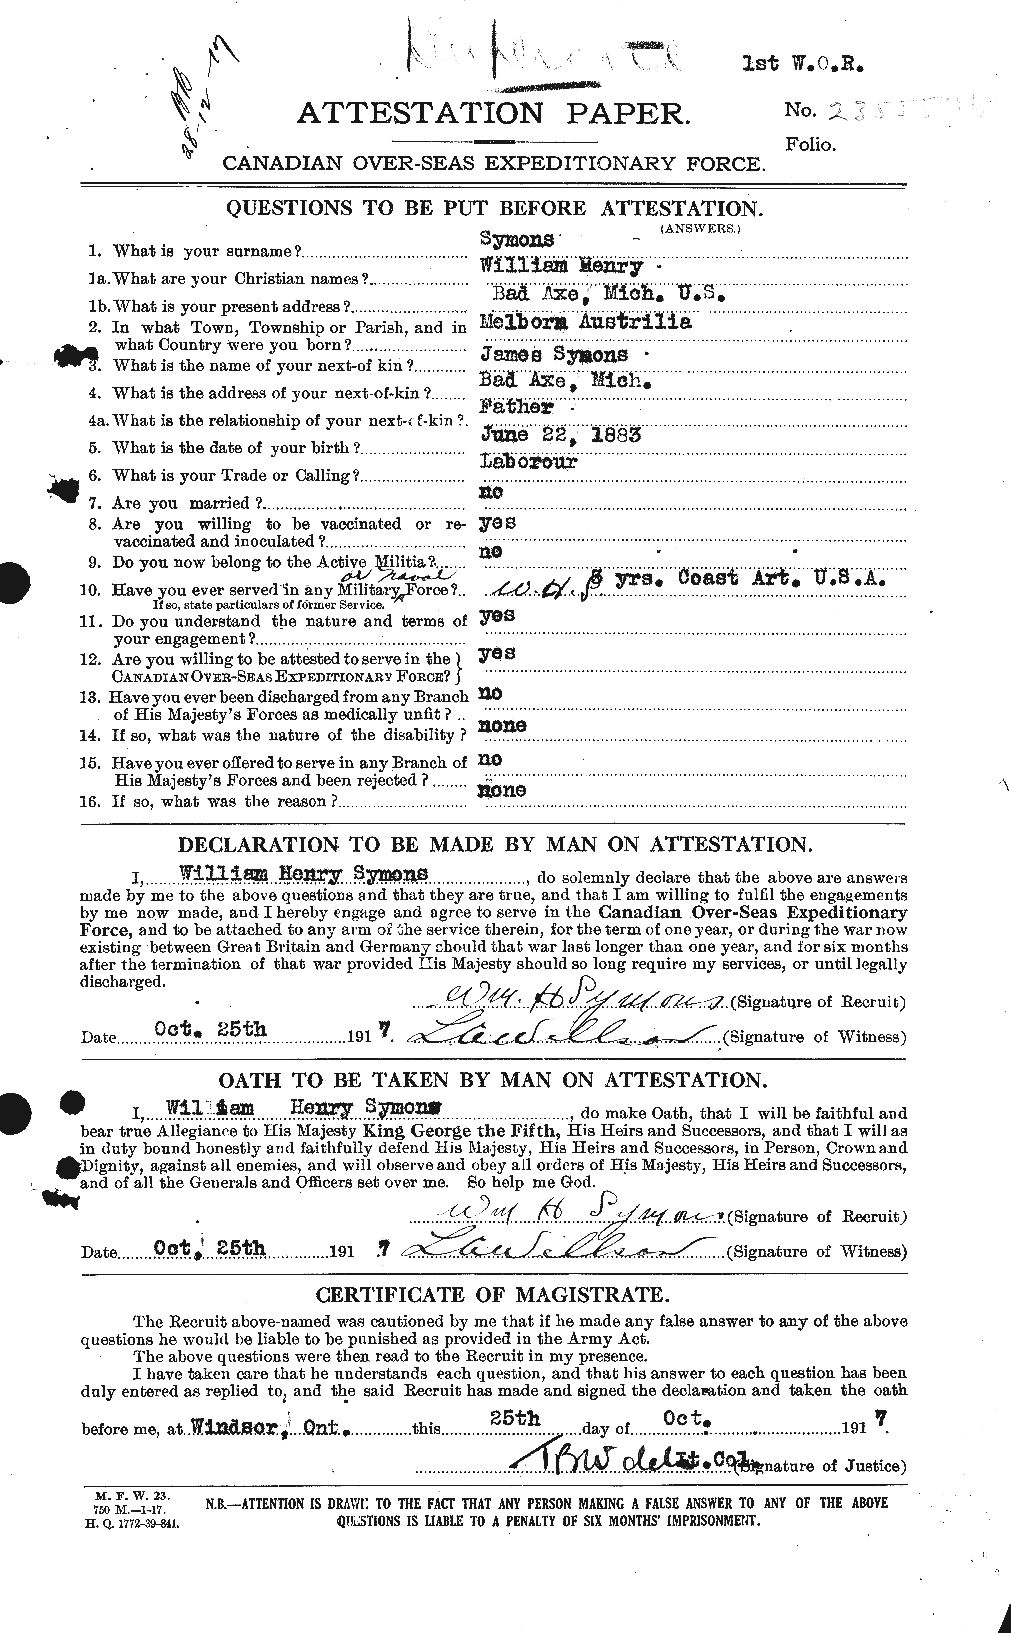 Personnel Records of the First World War - CEF 129012a